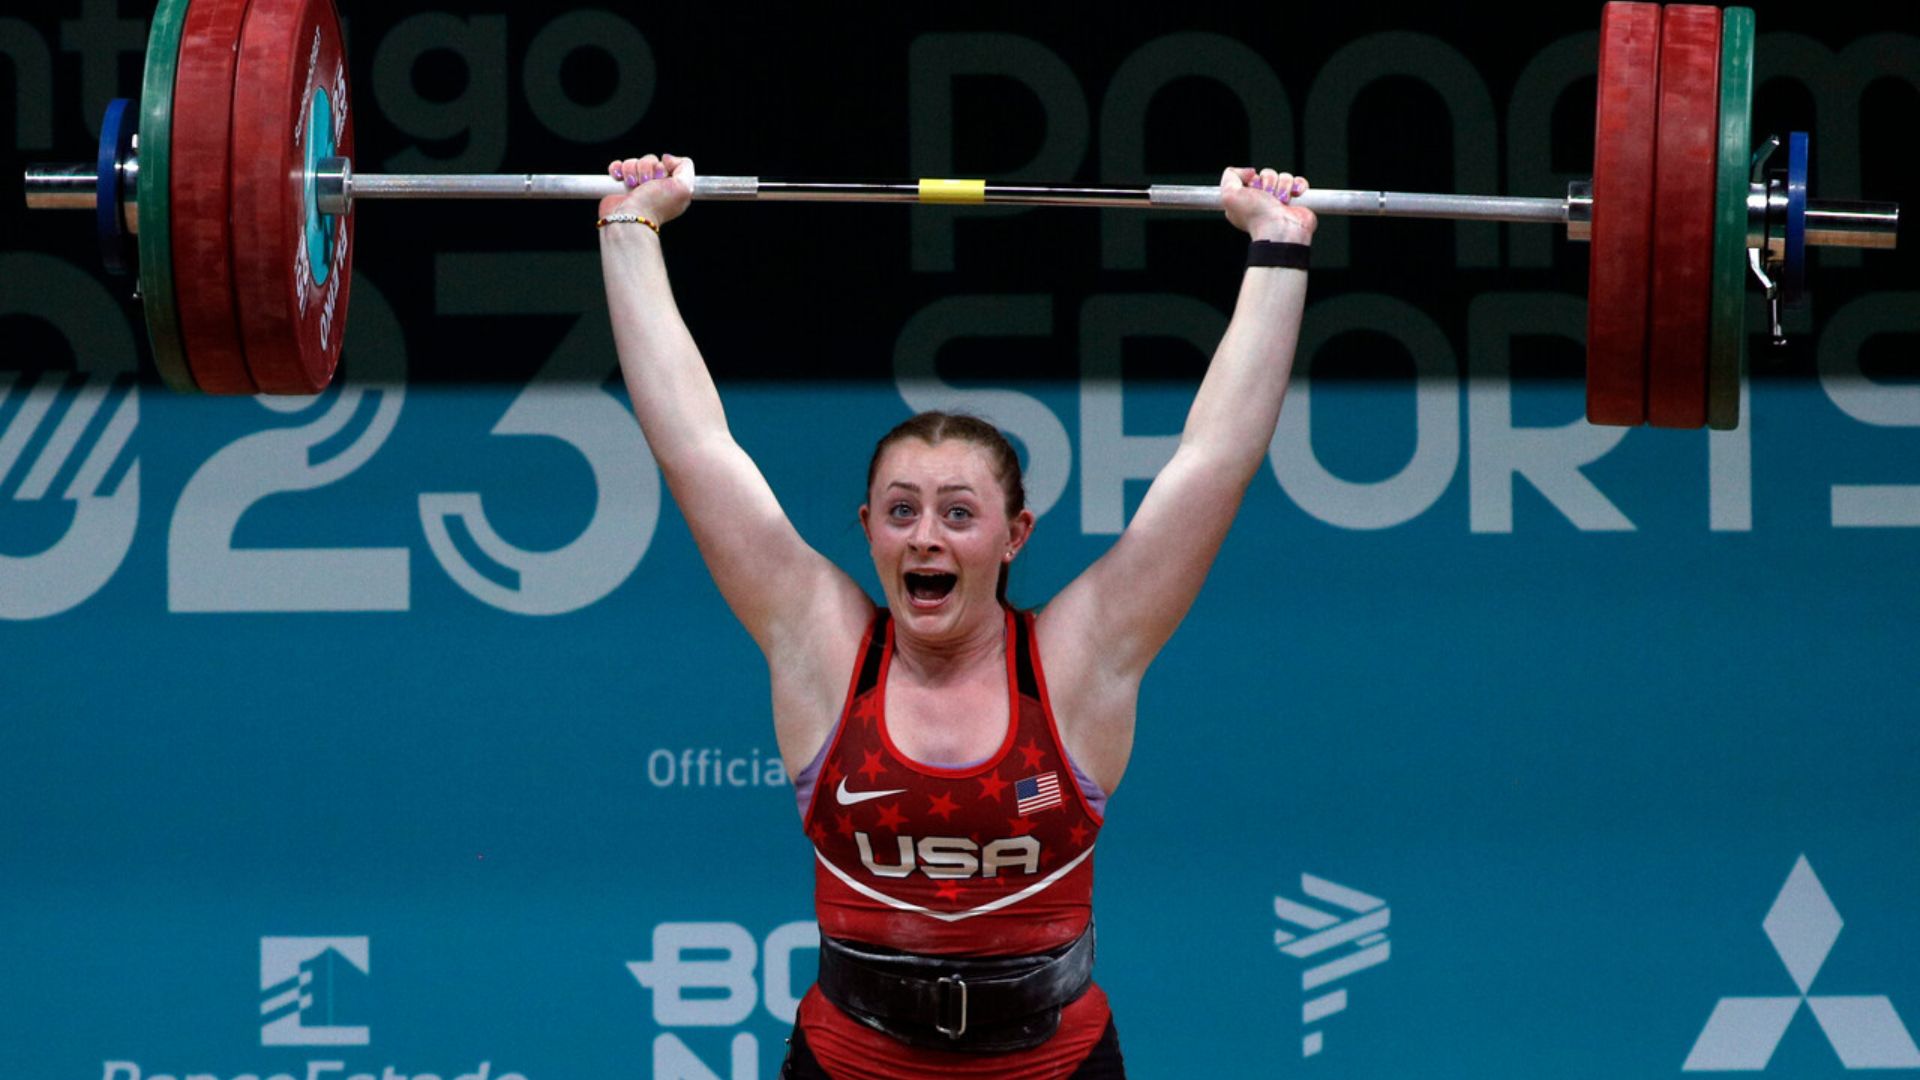 Olivia Reeves extends the United States' dominance with gold medal in weight